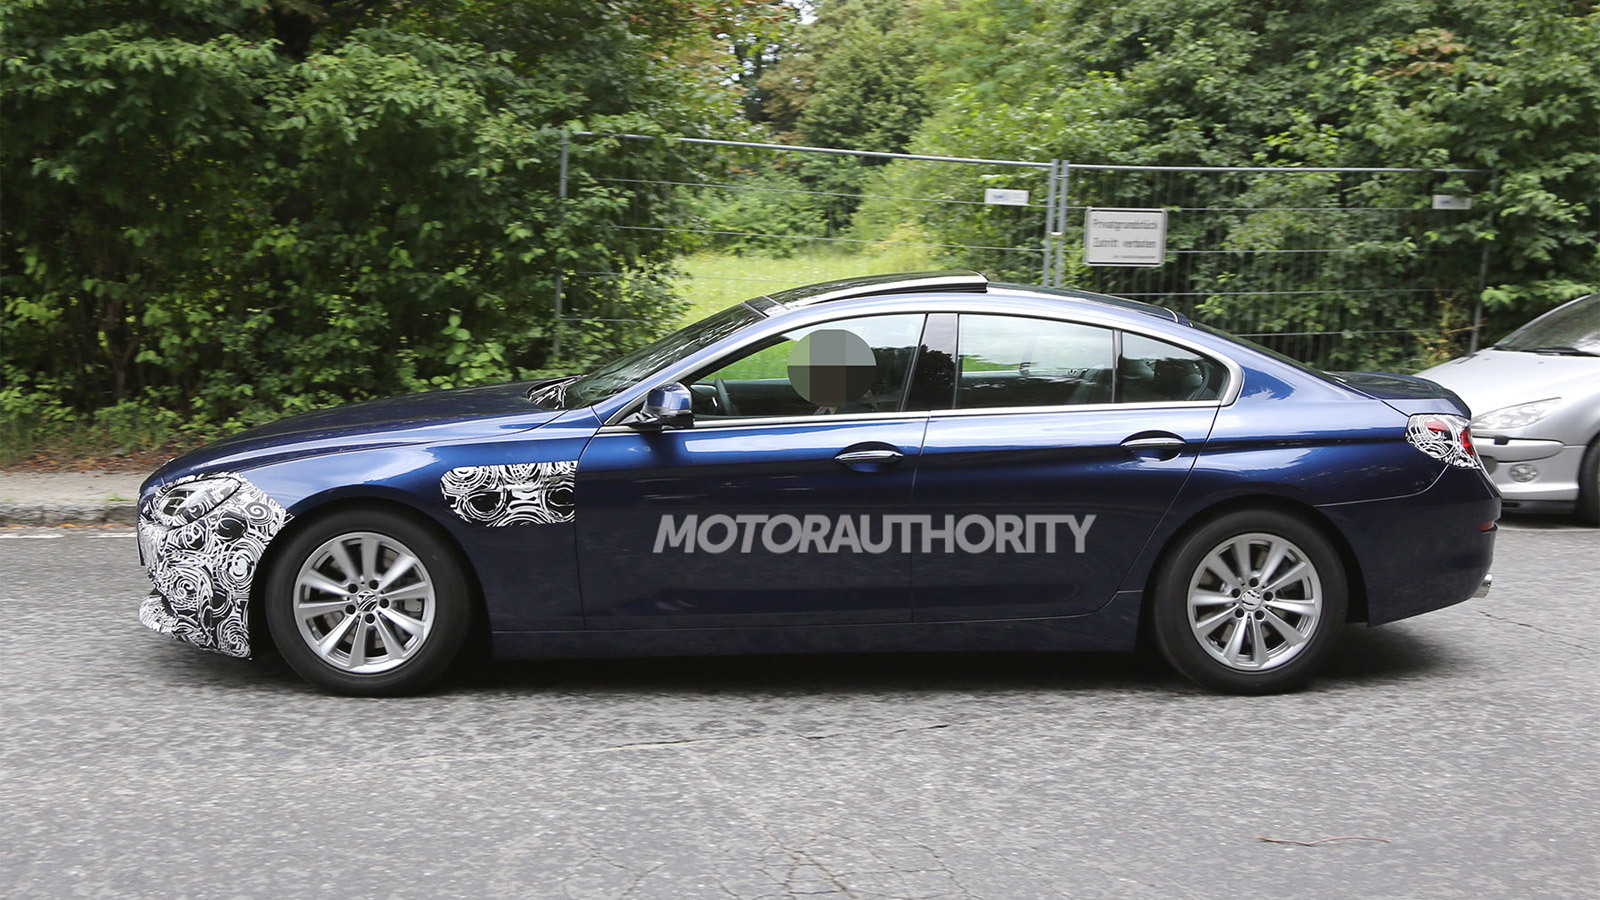 2016 BMW 6-Series Gran Coupe facelift spy shots